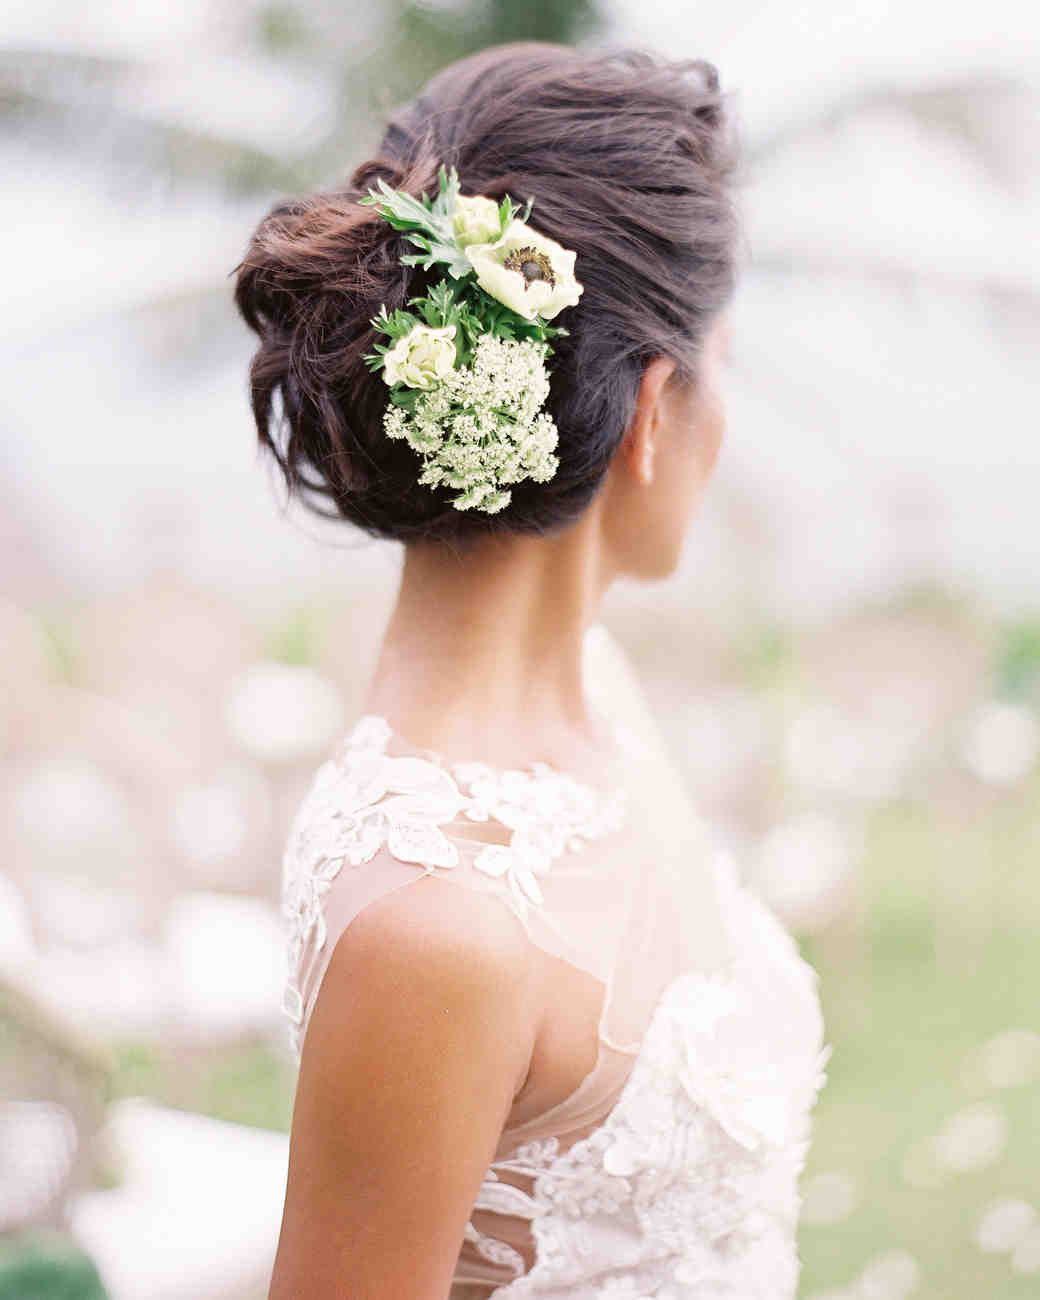 Wedding Hairstyles With Flower
 20 Wedding Hairstyles with Flowers